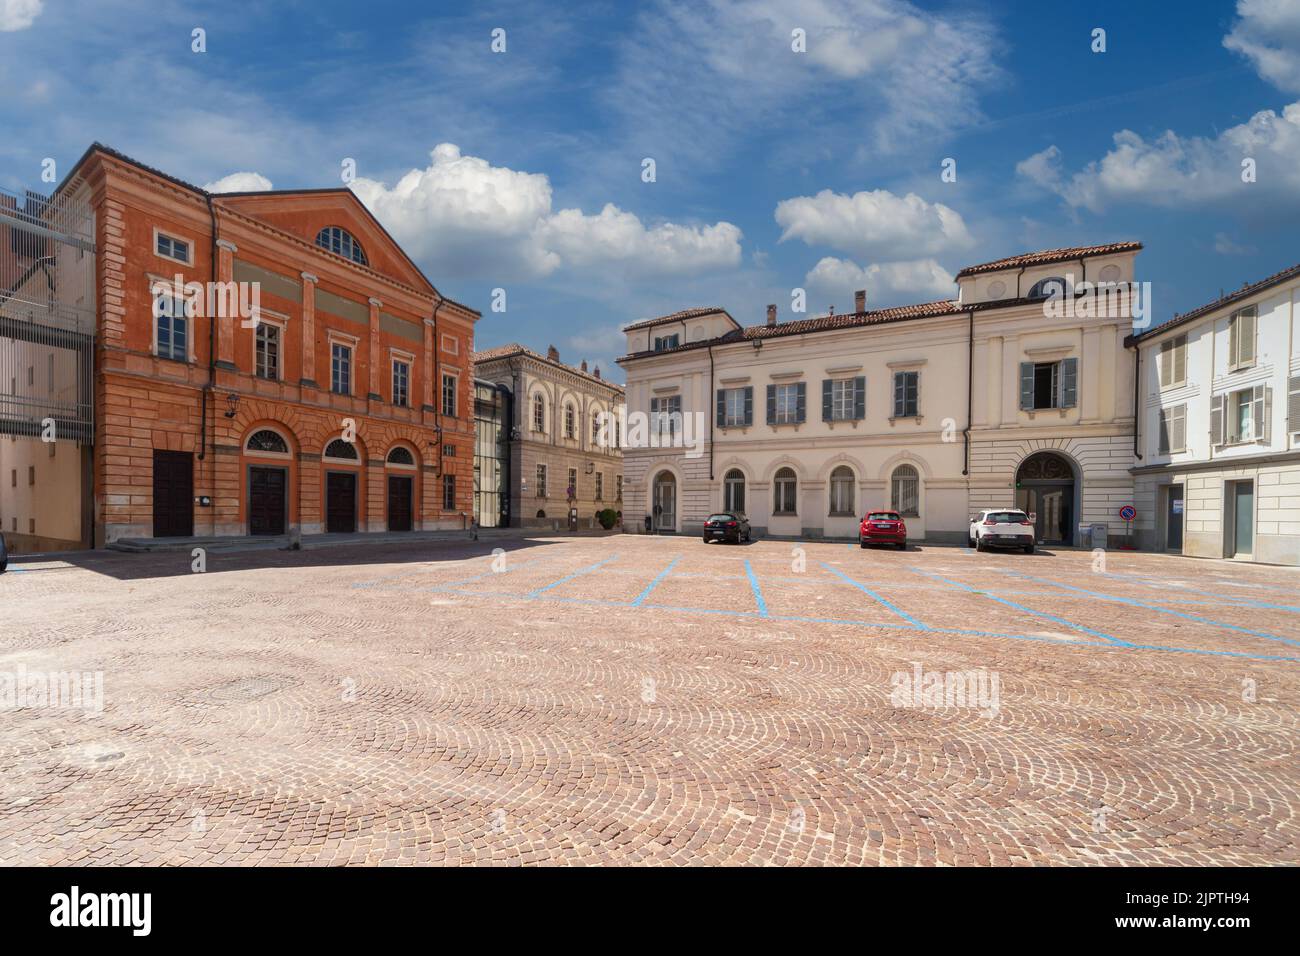 Alba, Langhe, Piedmont, Italy: Vittorio Veneto cobblestone square with the Teatro Sociale (social theater) on the left and ancient buildings Stock Photo